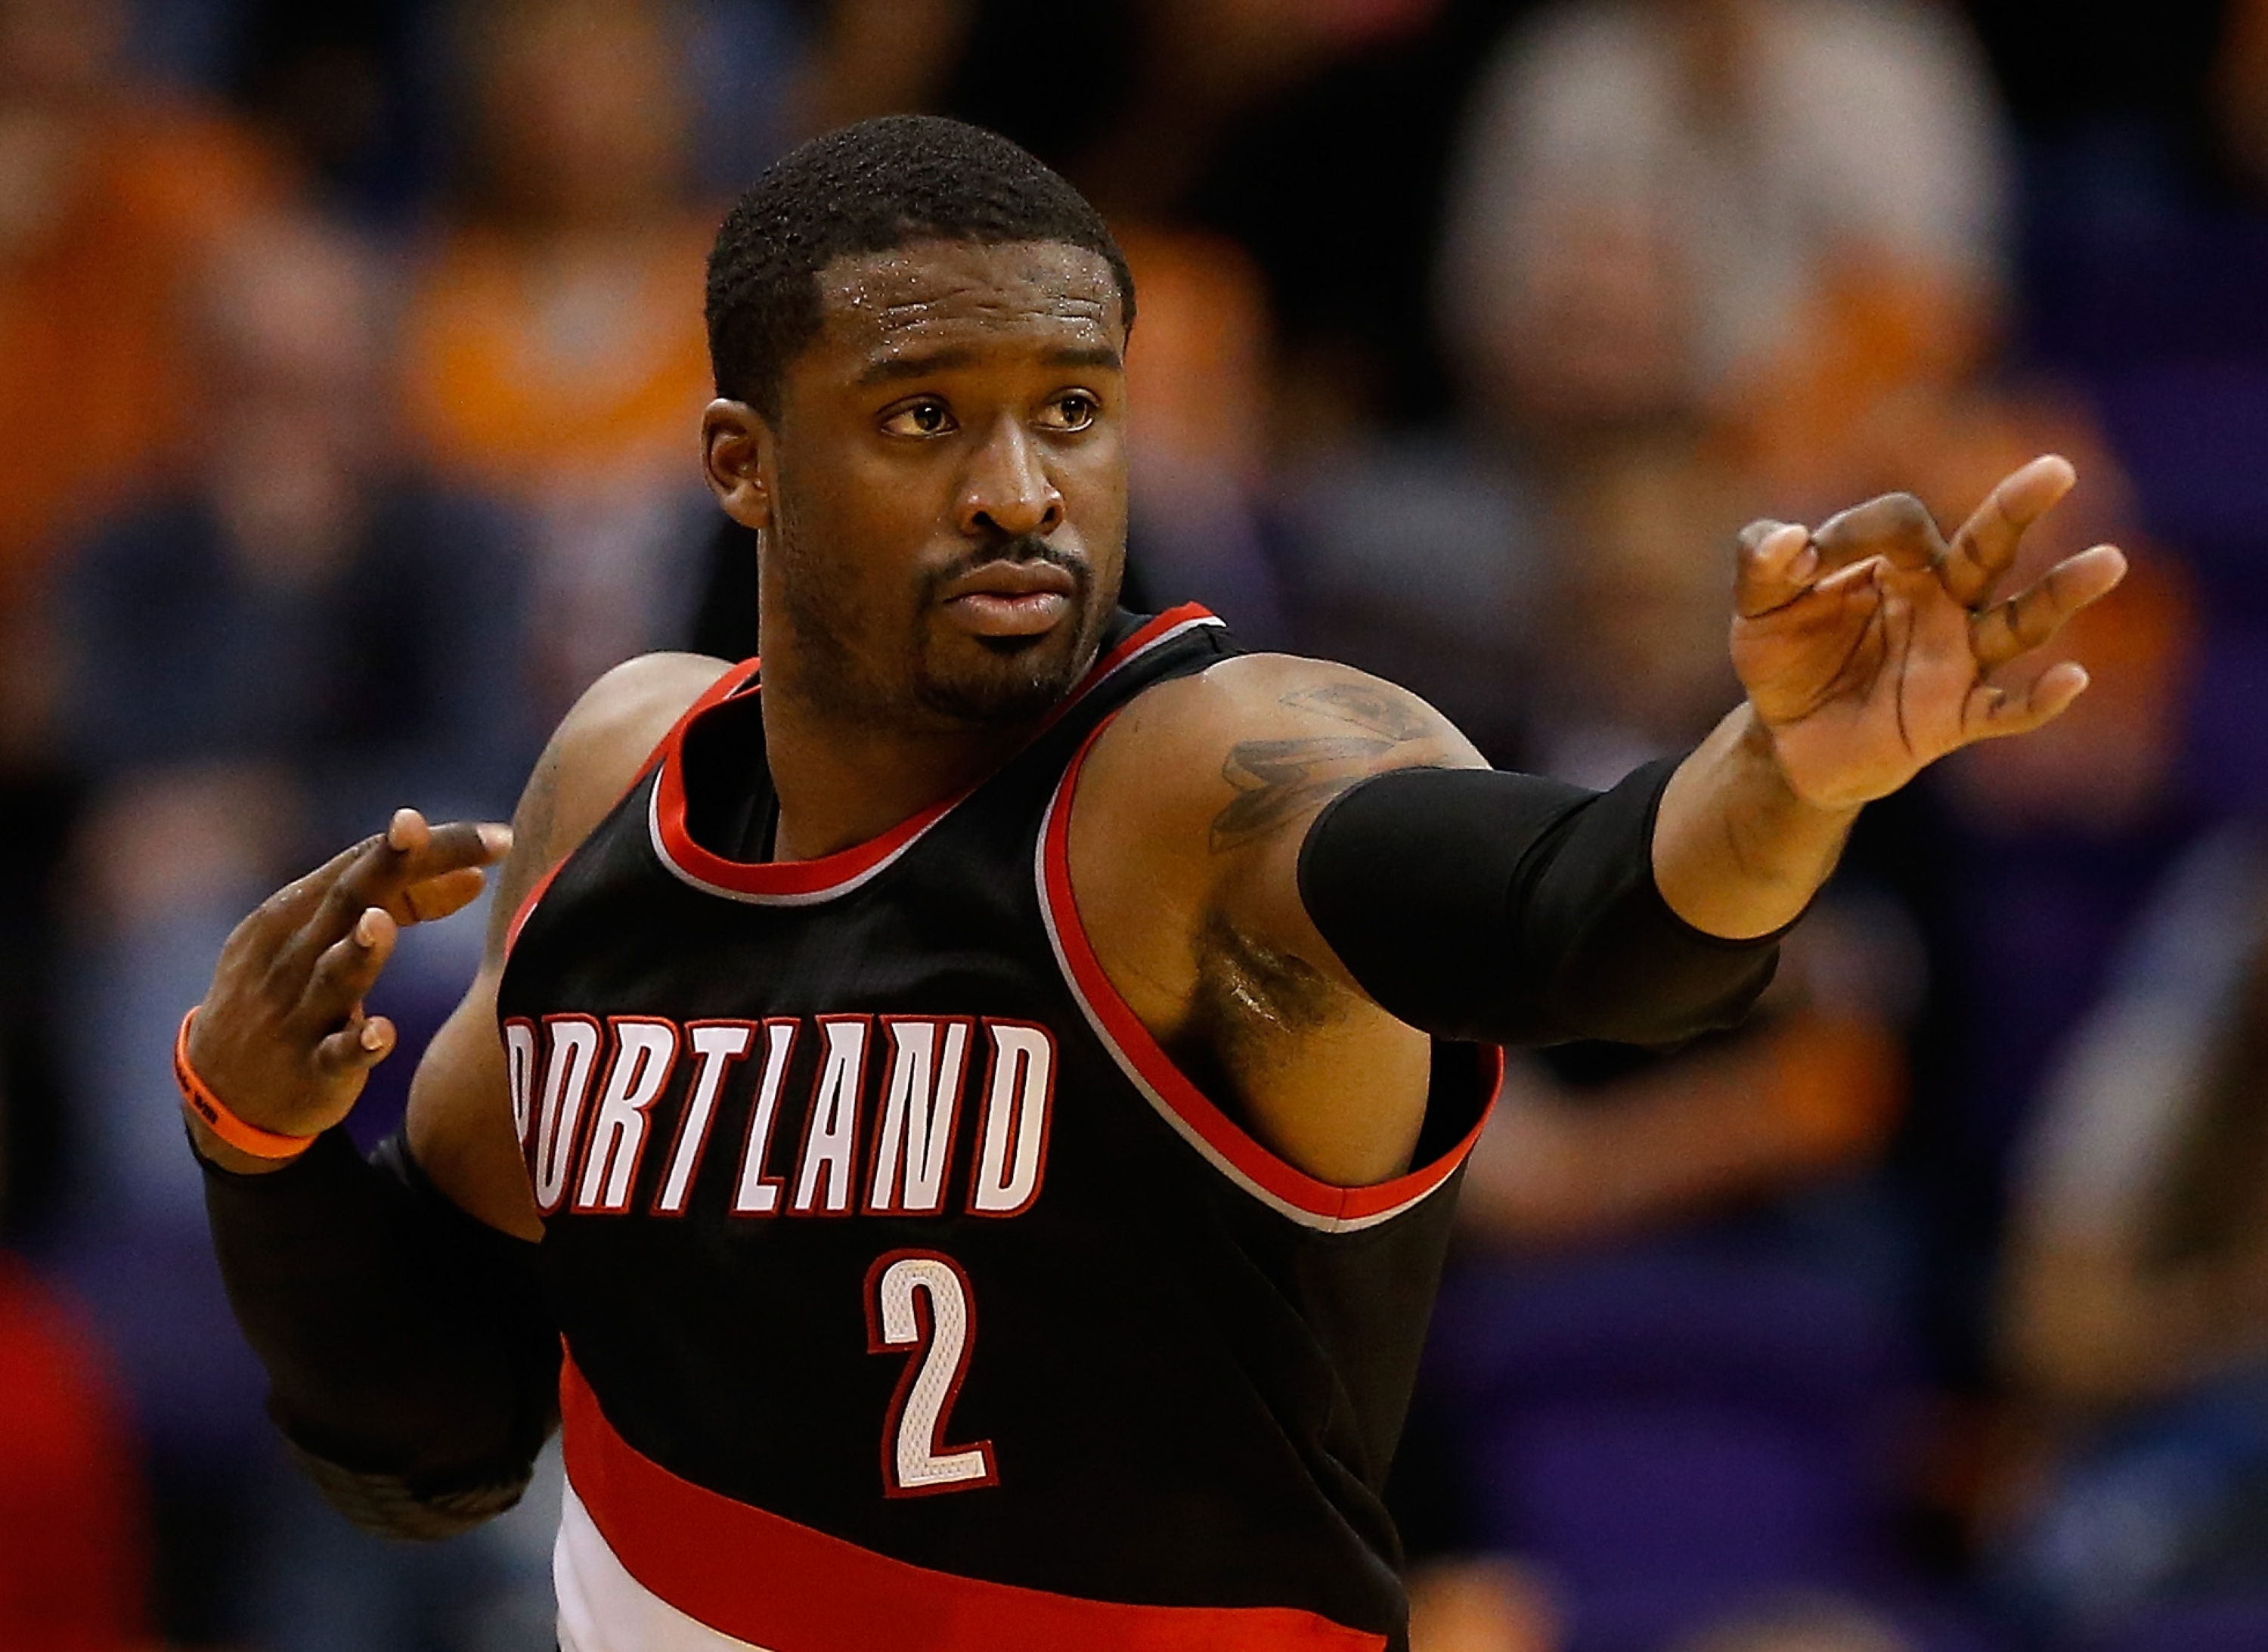 The Mavericks targeted Wesley Matthews for $70 million. Did they miss the mark? (Getty Images)